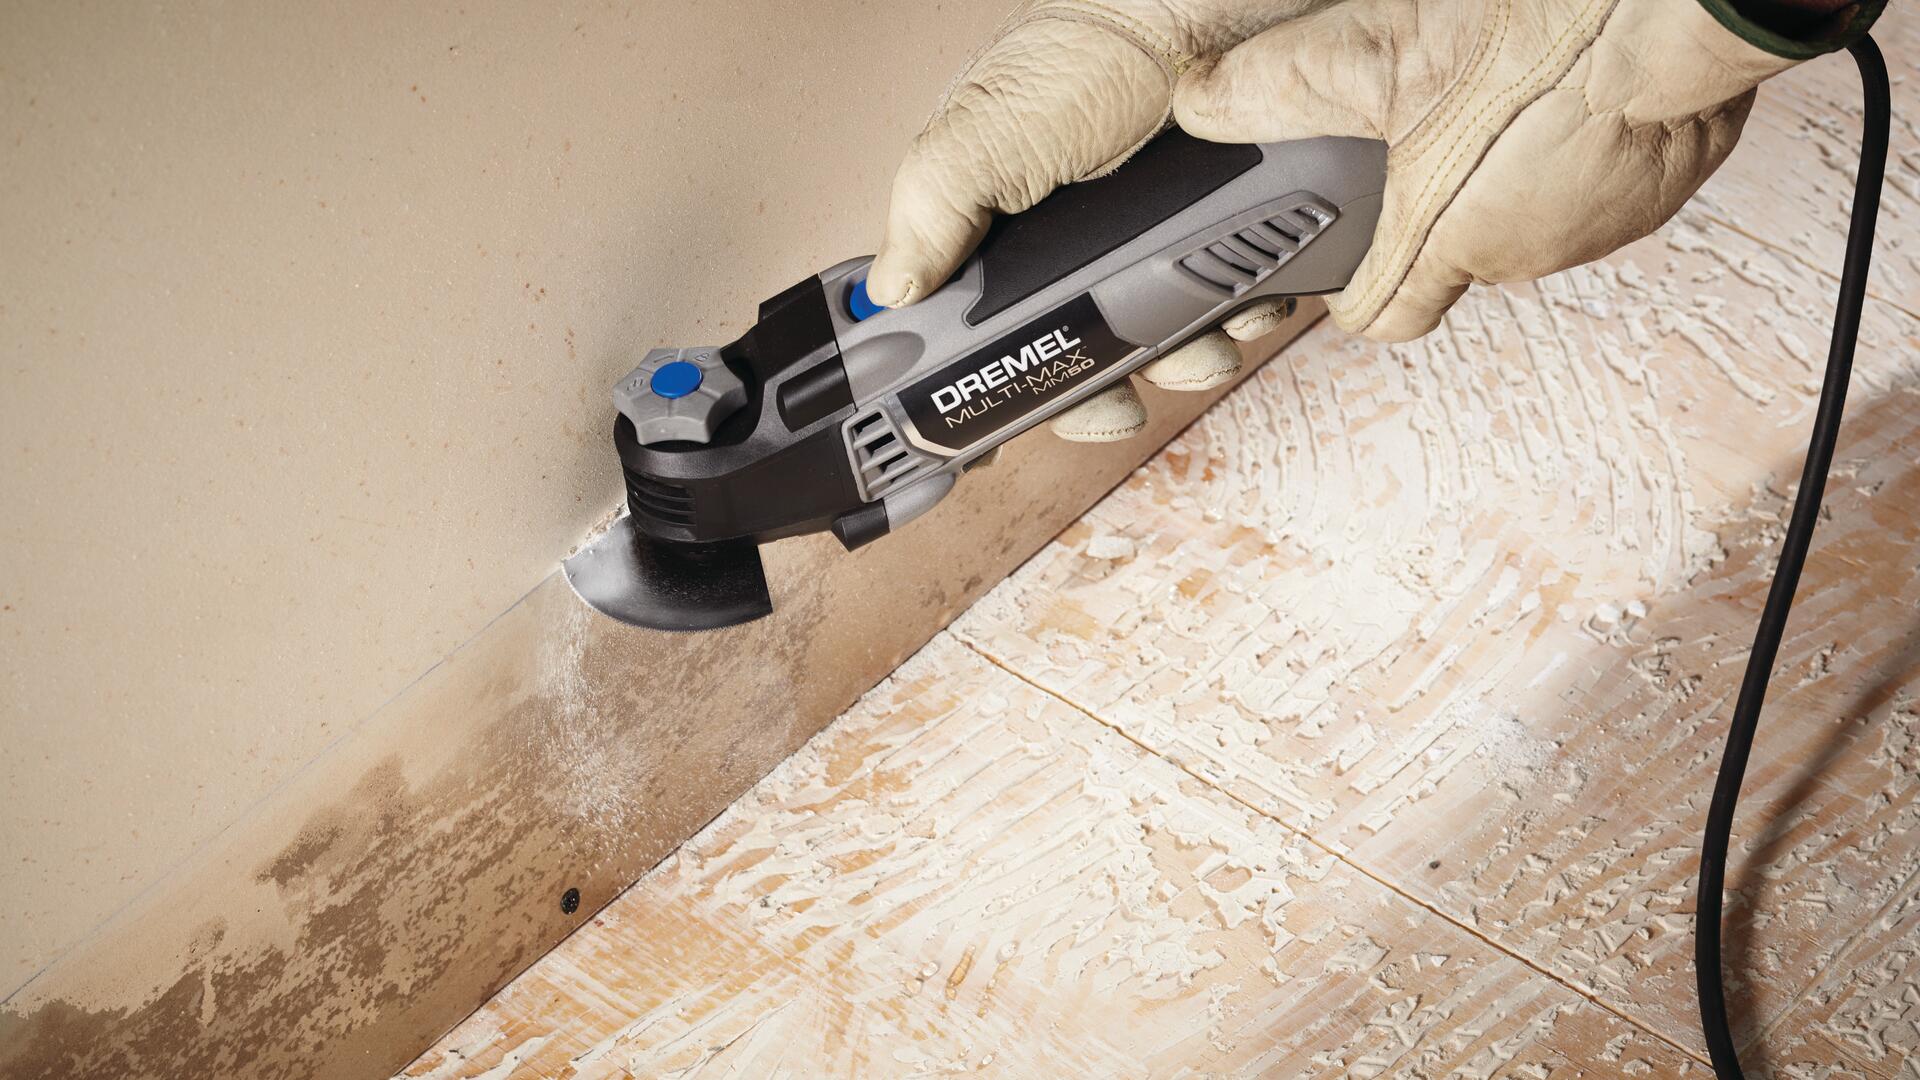 Dremel Multi-Max 5-Piece Blade Set in the Oscillating Tool Accessory Kits  department at